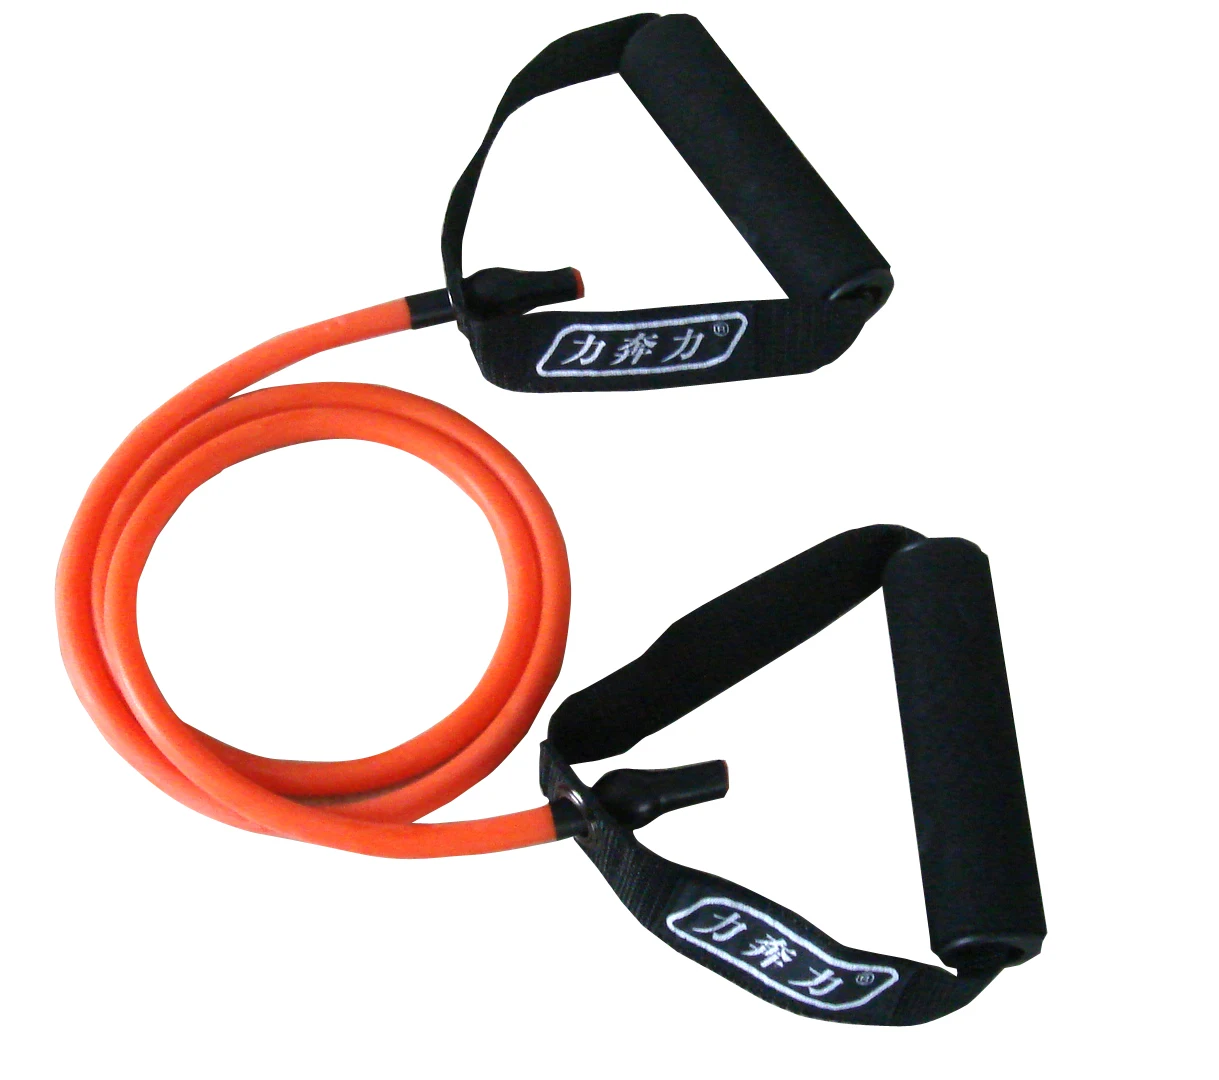 

Gym fitness exercise resistance bands with foam handles., Customized color